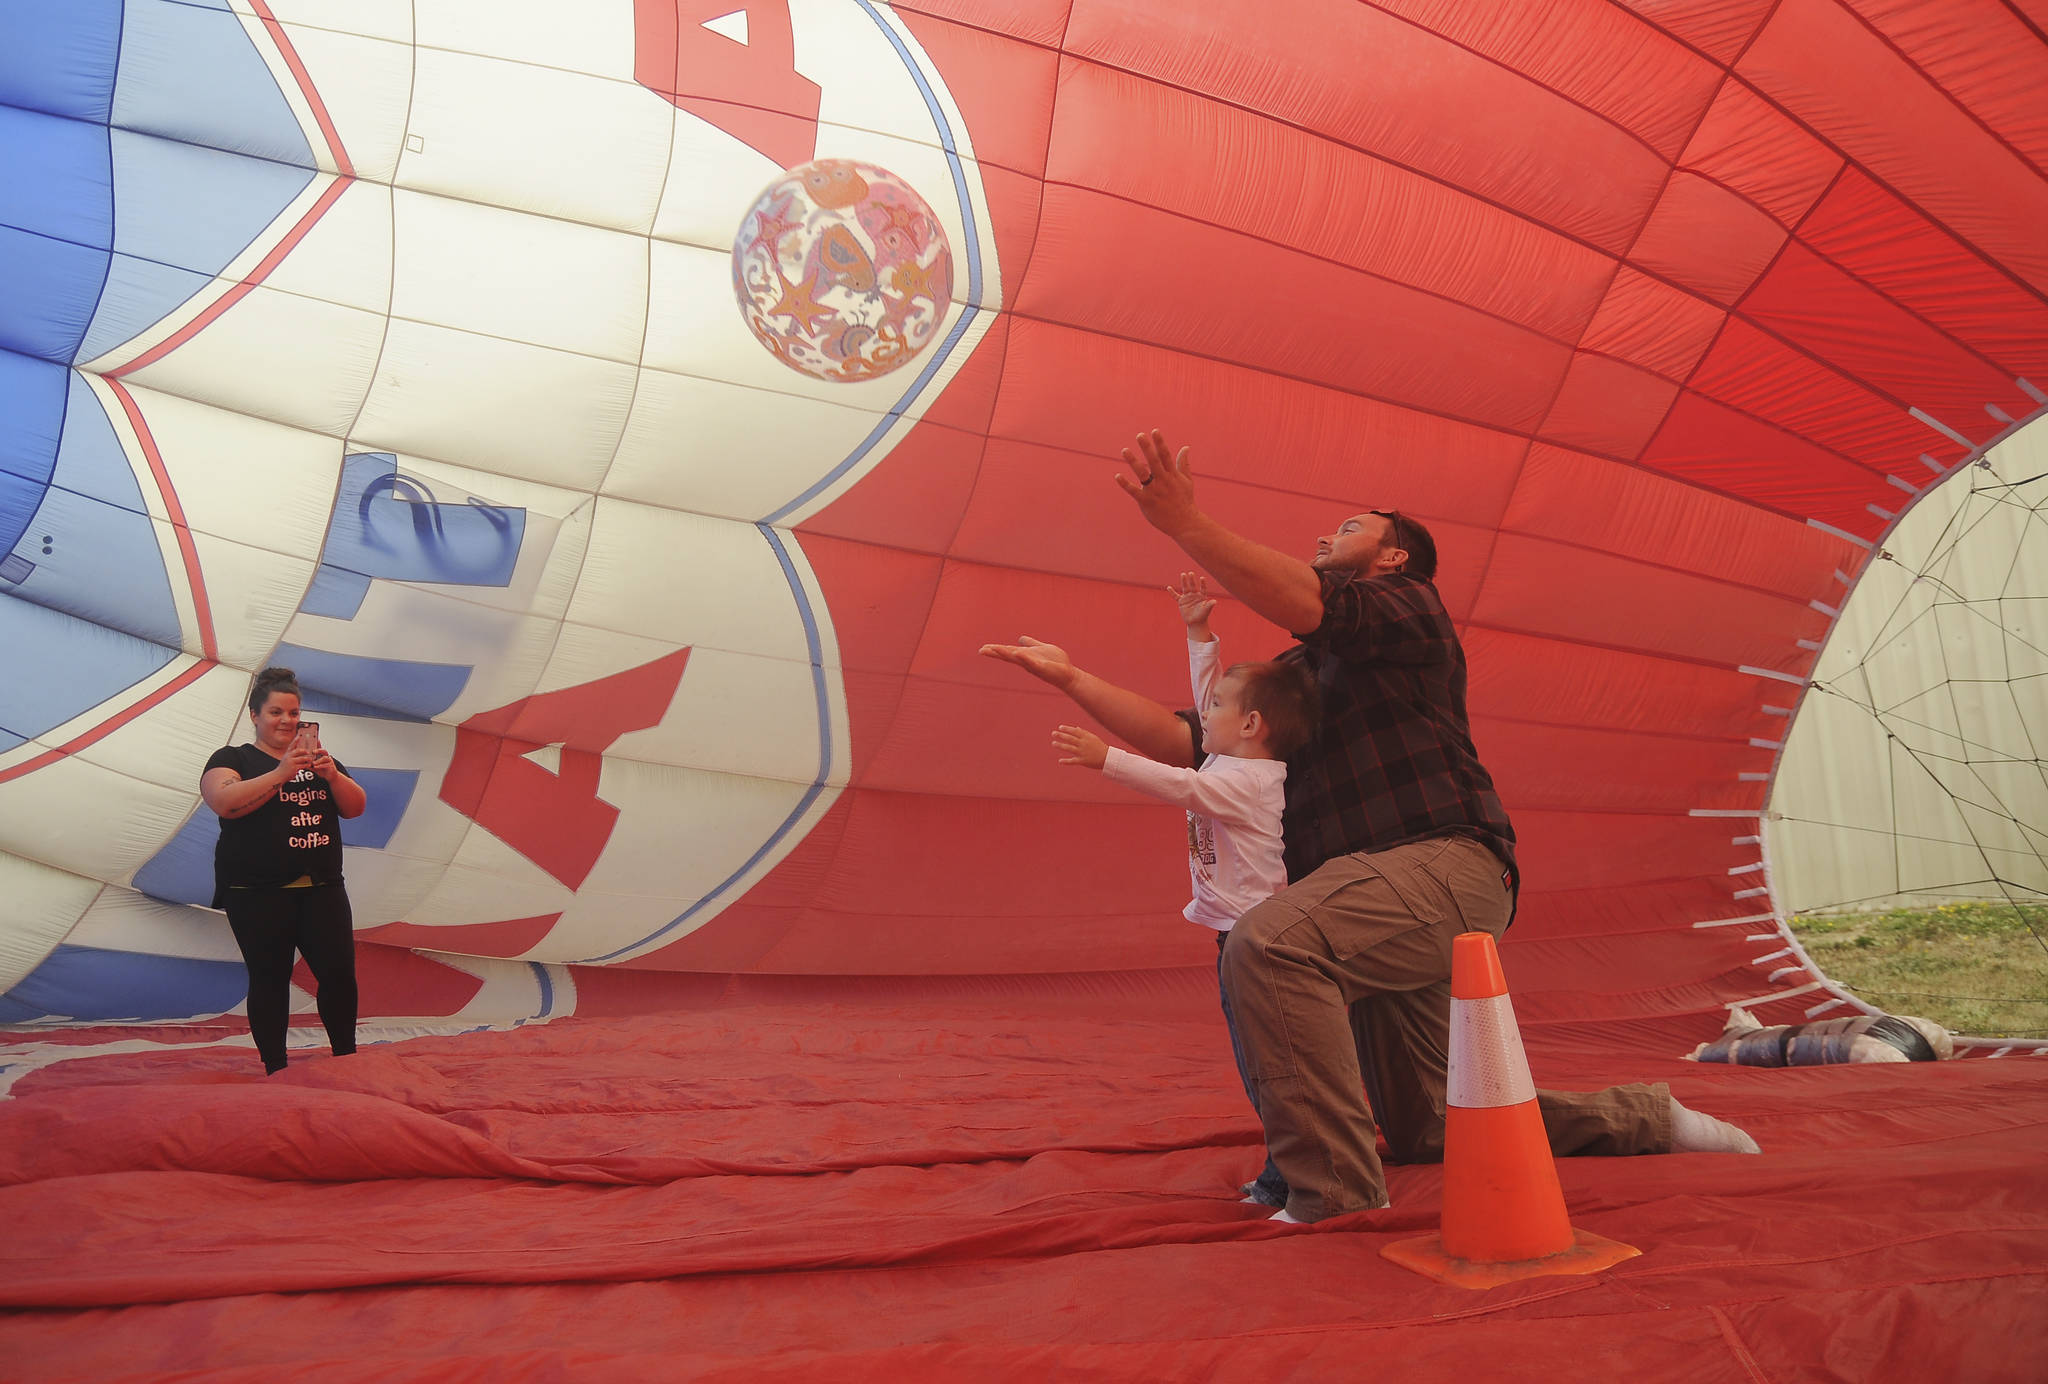 As Amanda Cox takes a photo, and Lukas Cox helps 3-year-old Camden toss an inflated ball in the Morning Star Balloon Co.’s “bouncy balloon” at the 2019 Olympic Peninsula Air Affaire and Sequim Valley Fly-in on Aug. 24. Sequim Gazette photo by Michael Dashiell